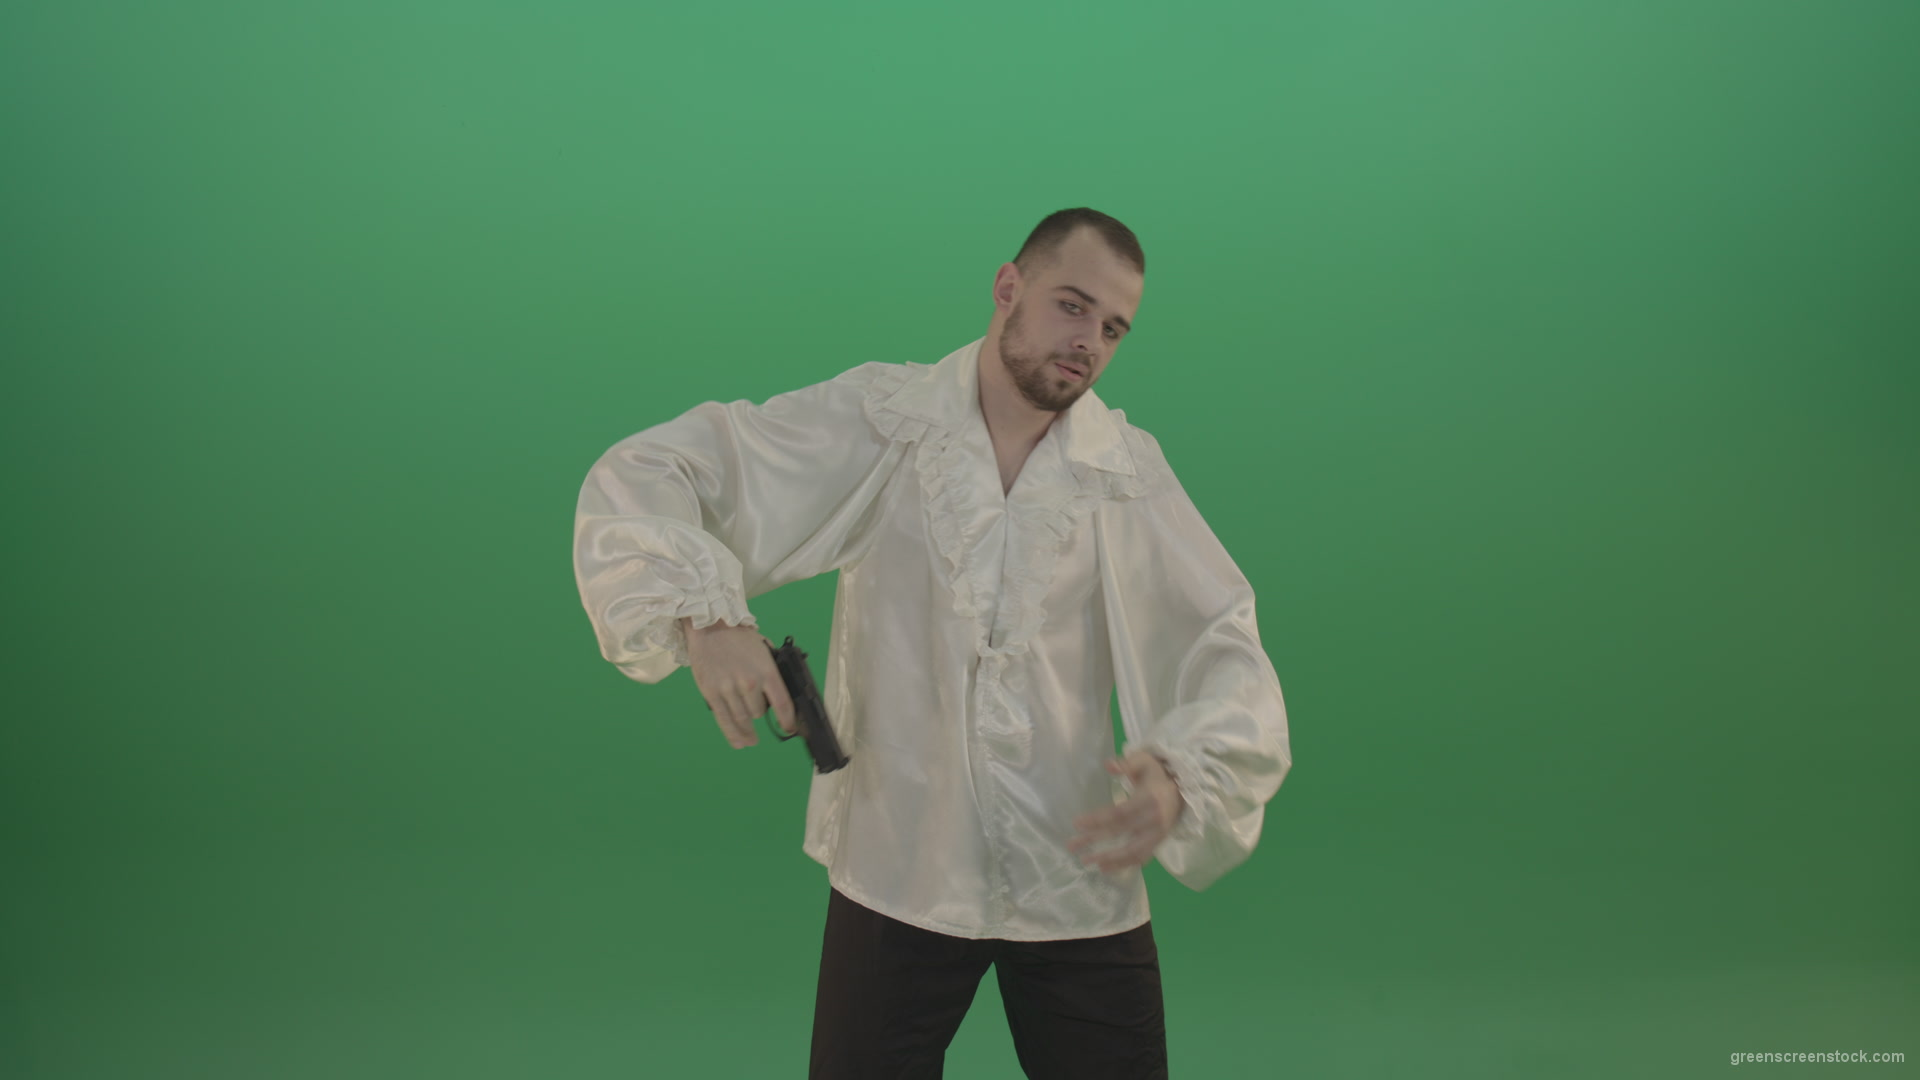 Man-in-white-shirt-shooting-with-pistol-hand-gun-isolated-in-green-screen-studio_009 Green Screen Stock